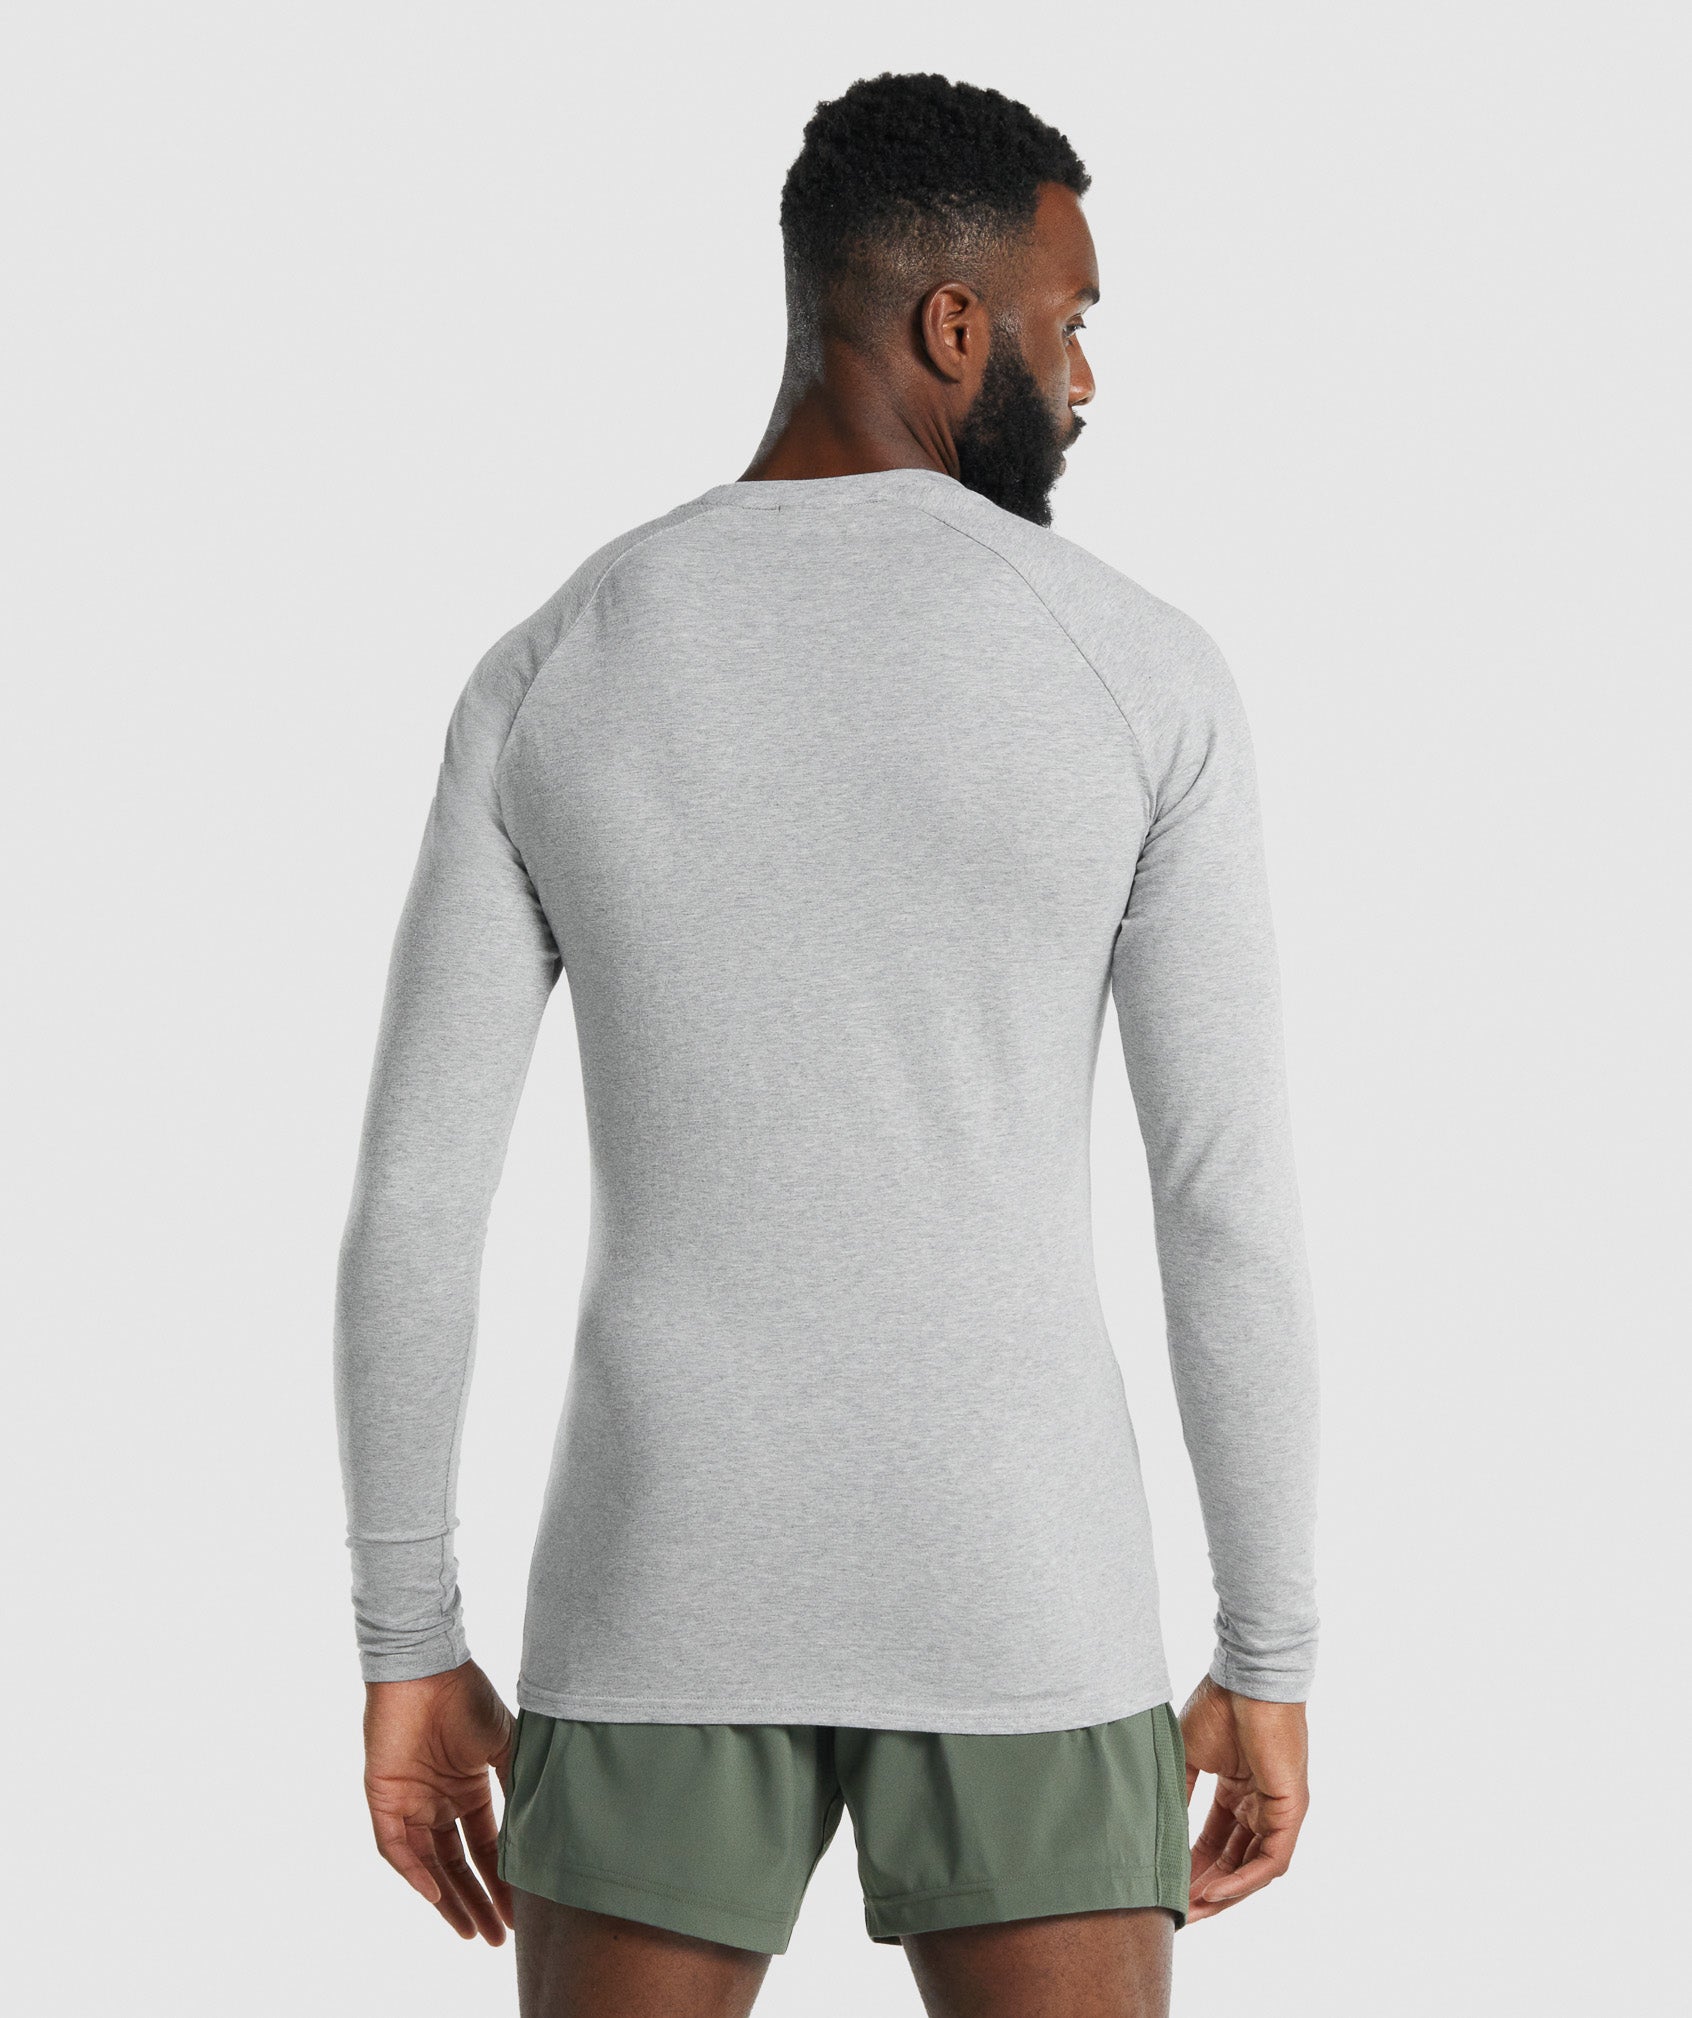 Apollo Long Sleeve T-Shirt in Light Grey Marl - view 2